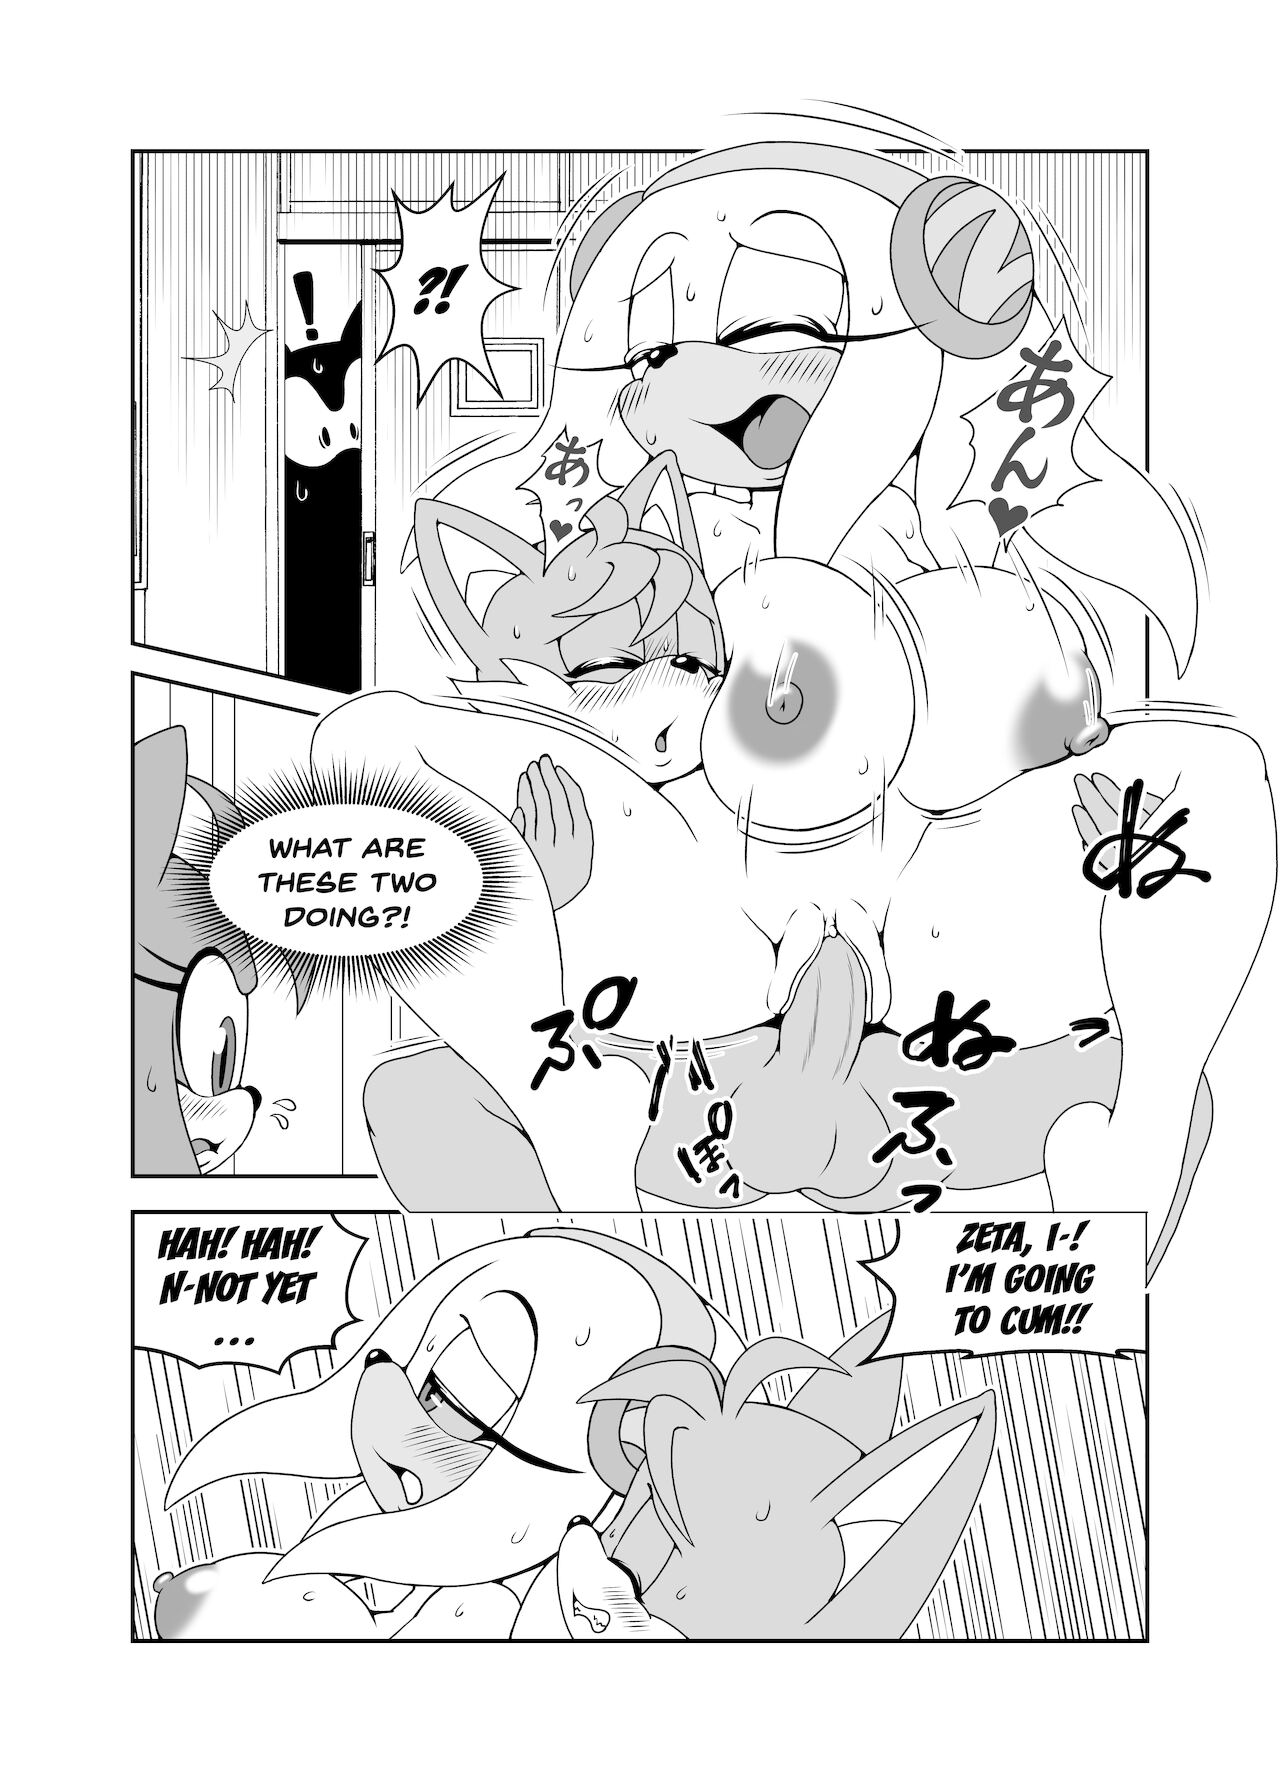 Canned Furry Porn - Canned Furry Gaiden 4 - Page 3 - IMHentai